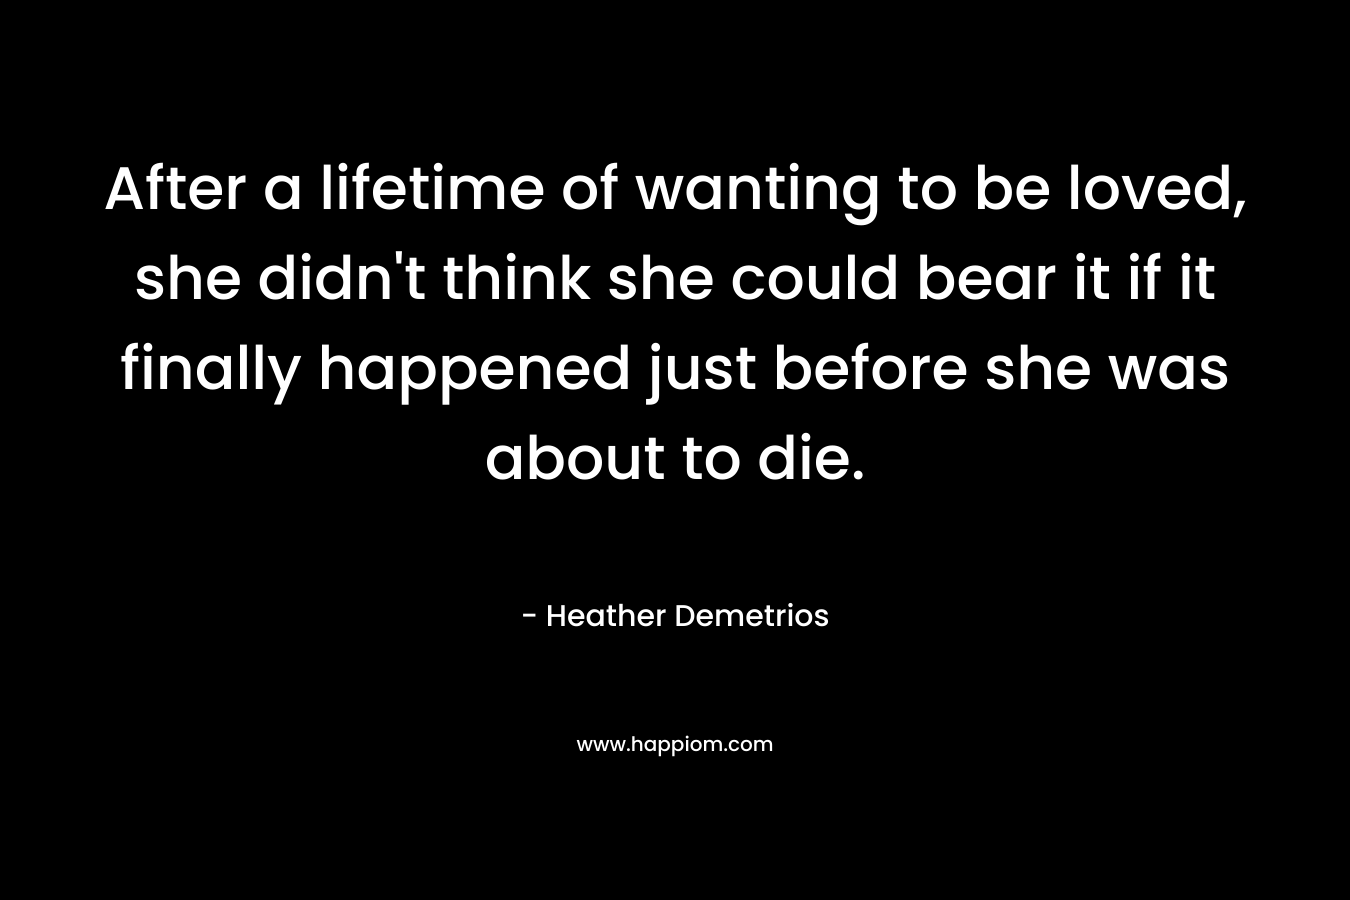 After a lifetime of wanting to be loved, she didn’t think she could bear it if it finally happened just before she was about to die. – Heather Demetrios